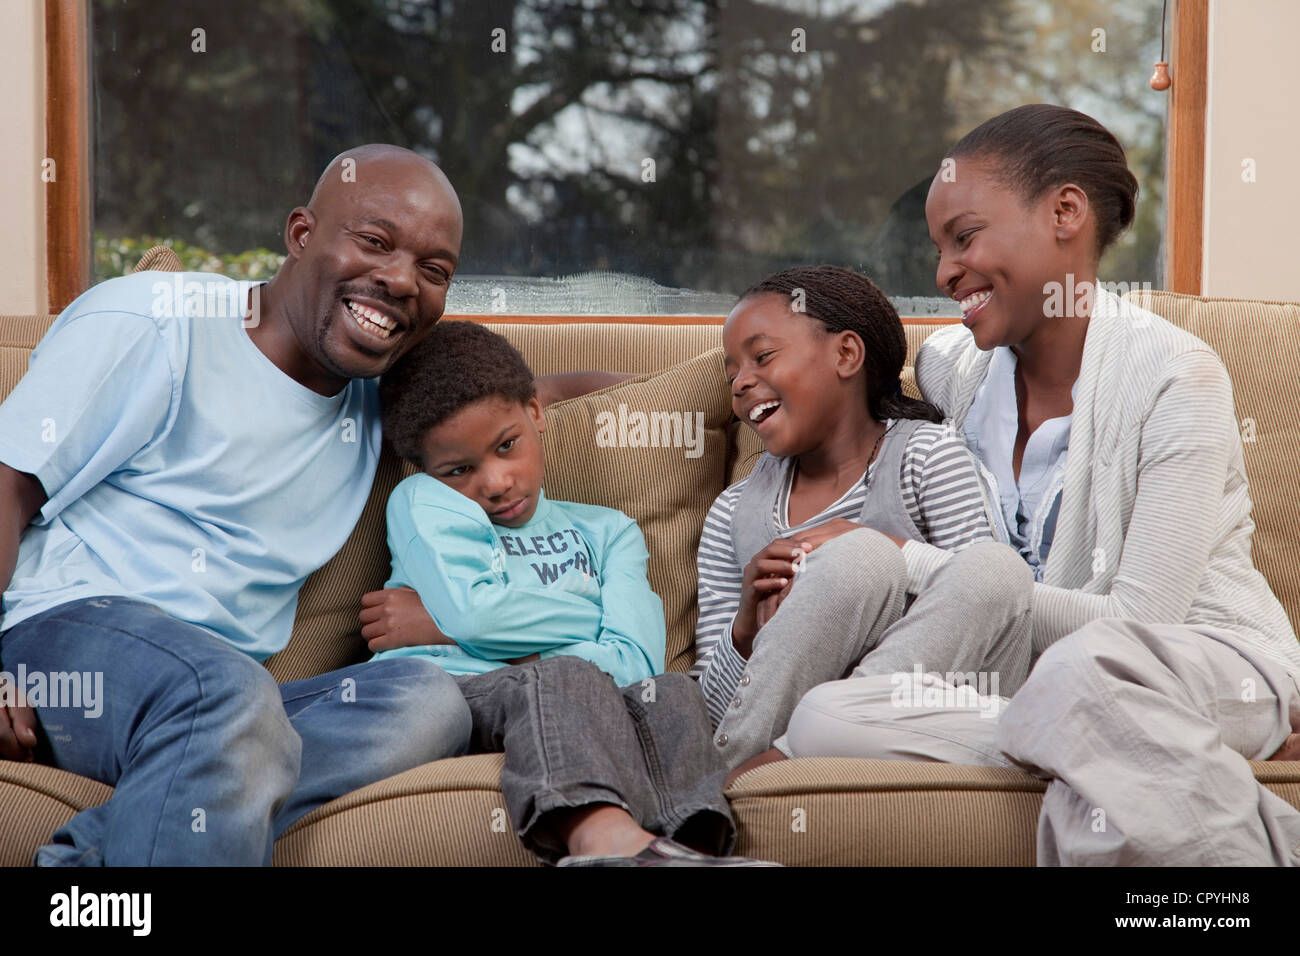 Family laughing and sitting on couch together, but son looks annoyed, Illovo Family, Johannesburg, South Africa. Stock Photo